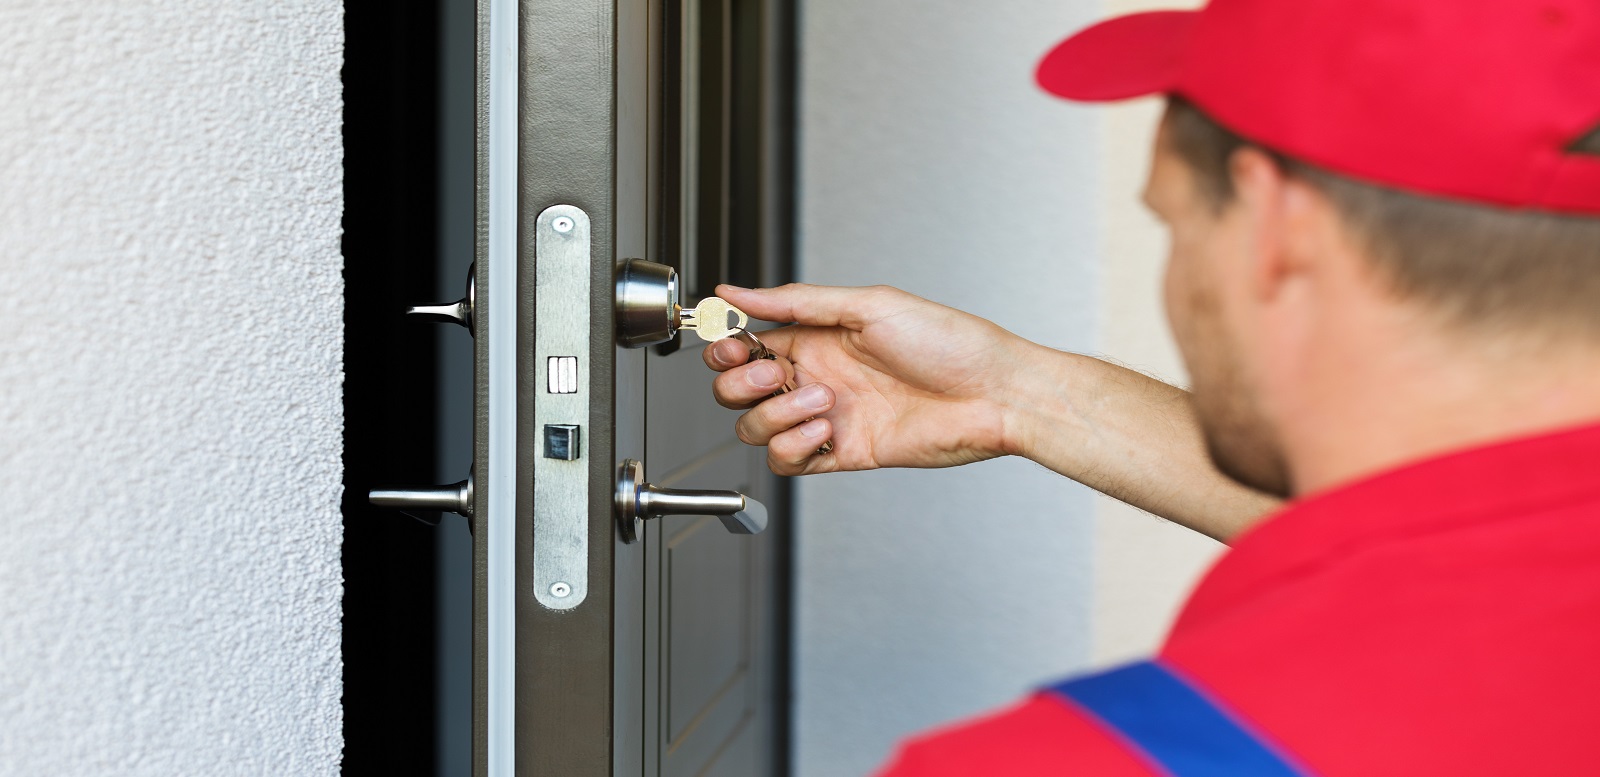 Keep Your Business Safe with Emergency Locksmith Services